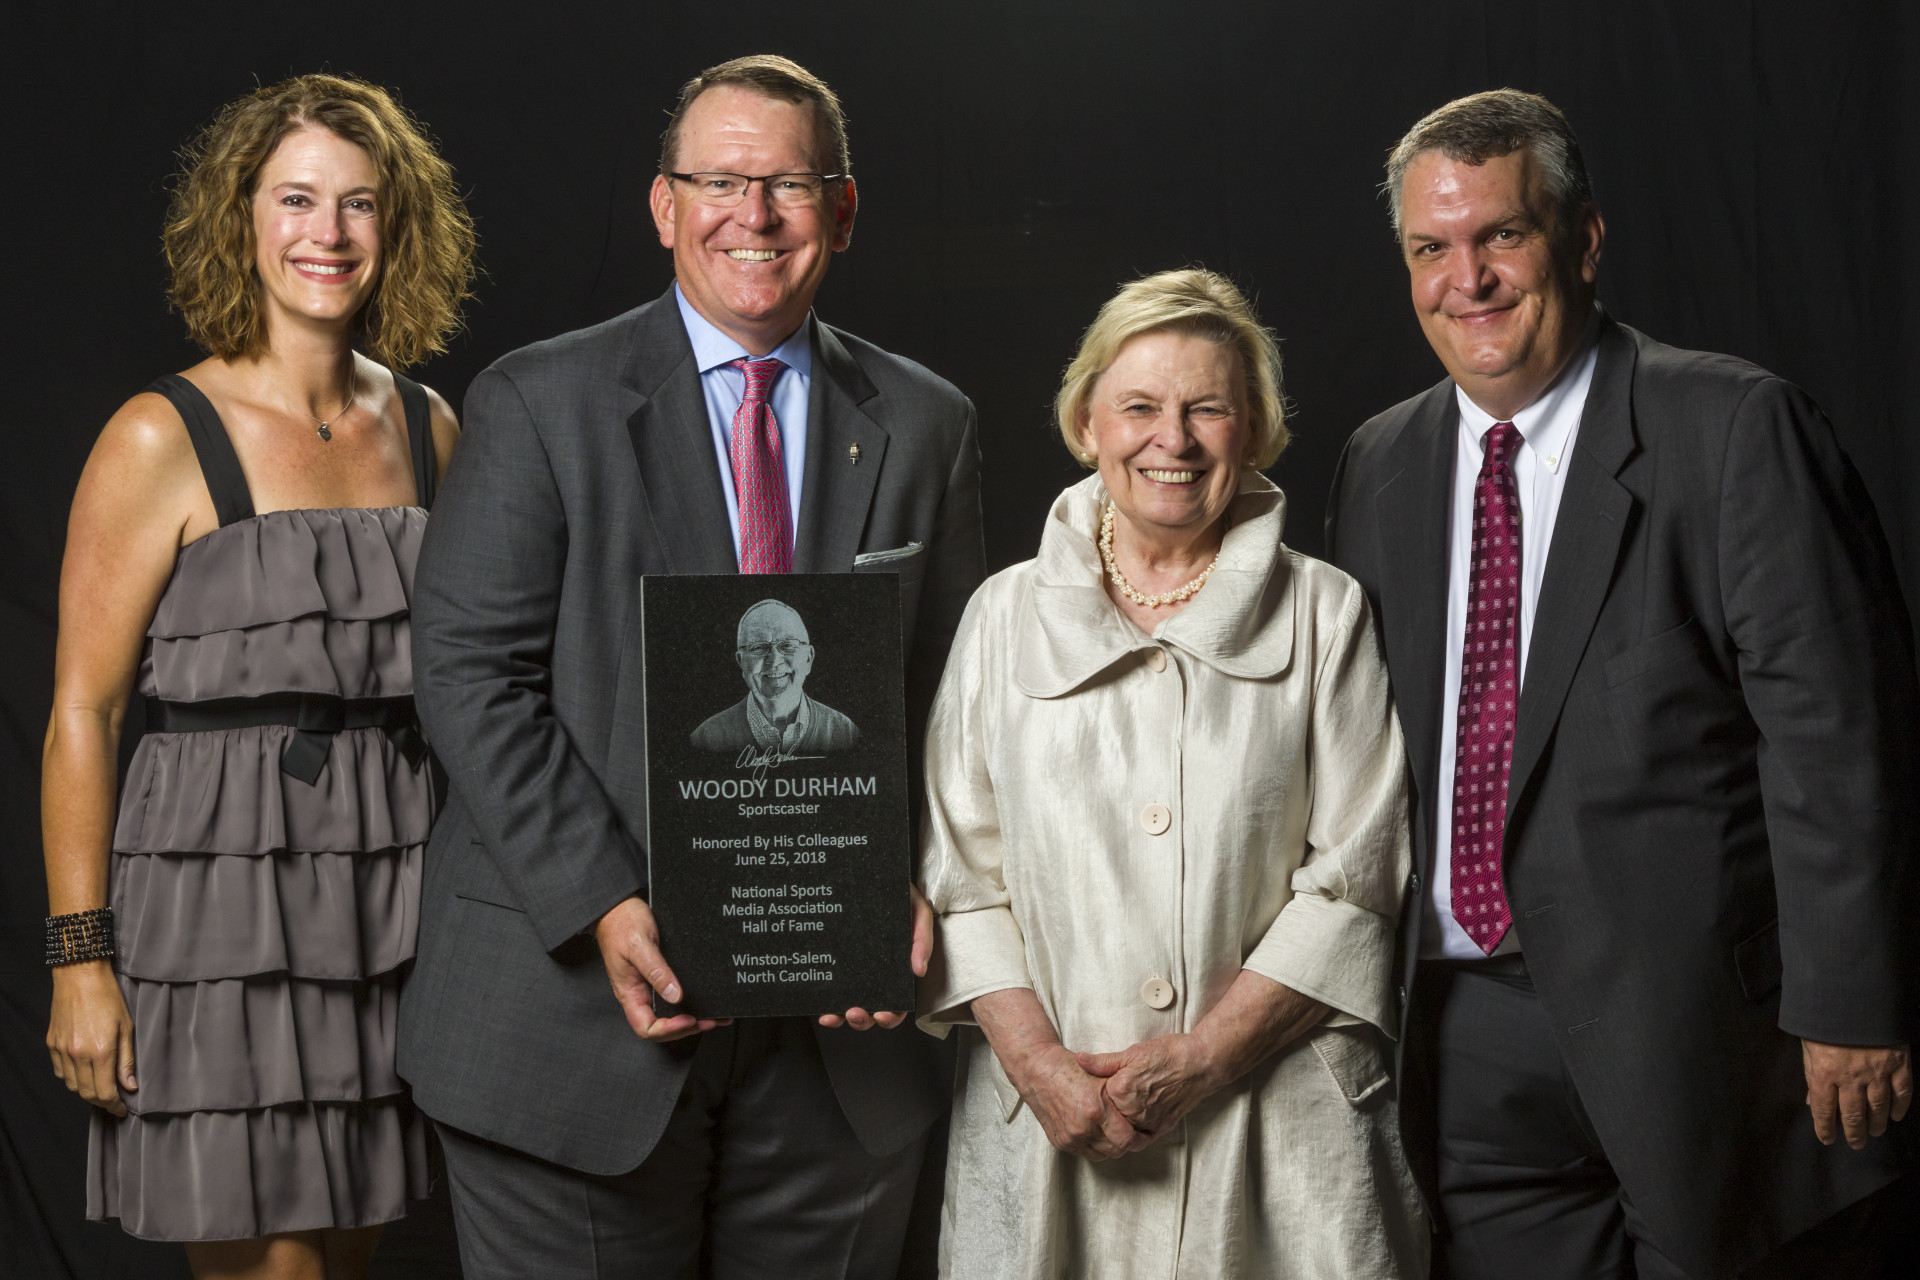 Woody Durham's family -- from left, Victoria Durham (daughter-in-law), Wes Durham (son), Jean Durham (widow), Taylor Durham (son) -- with his Hall of Fame plaque (Photo by Bob Leverone)